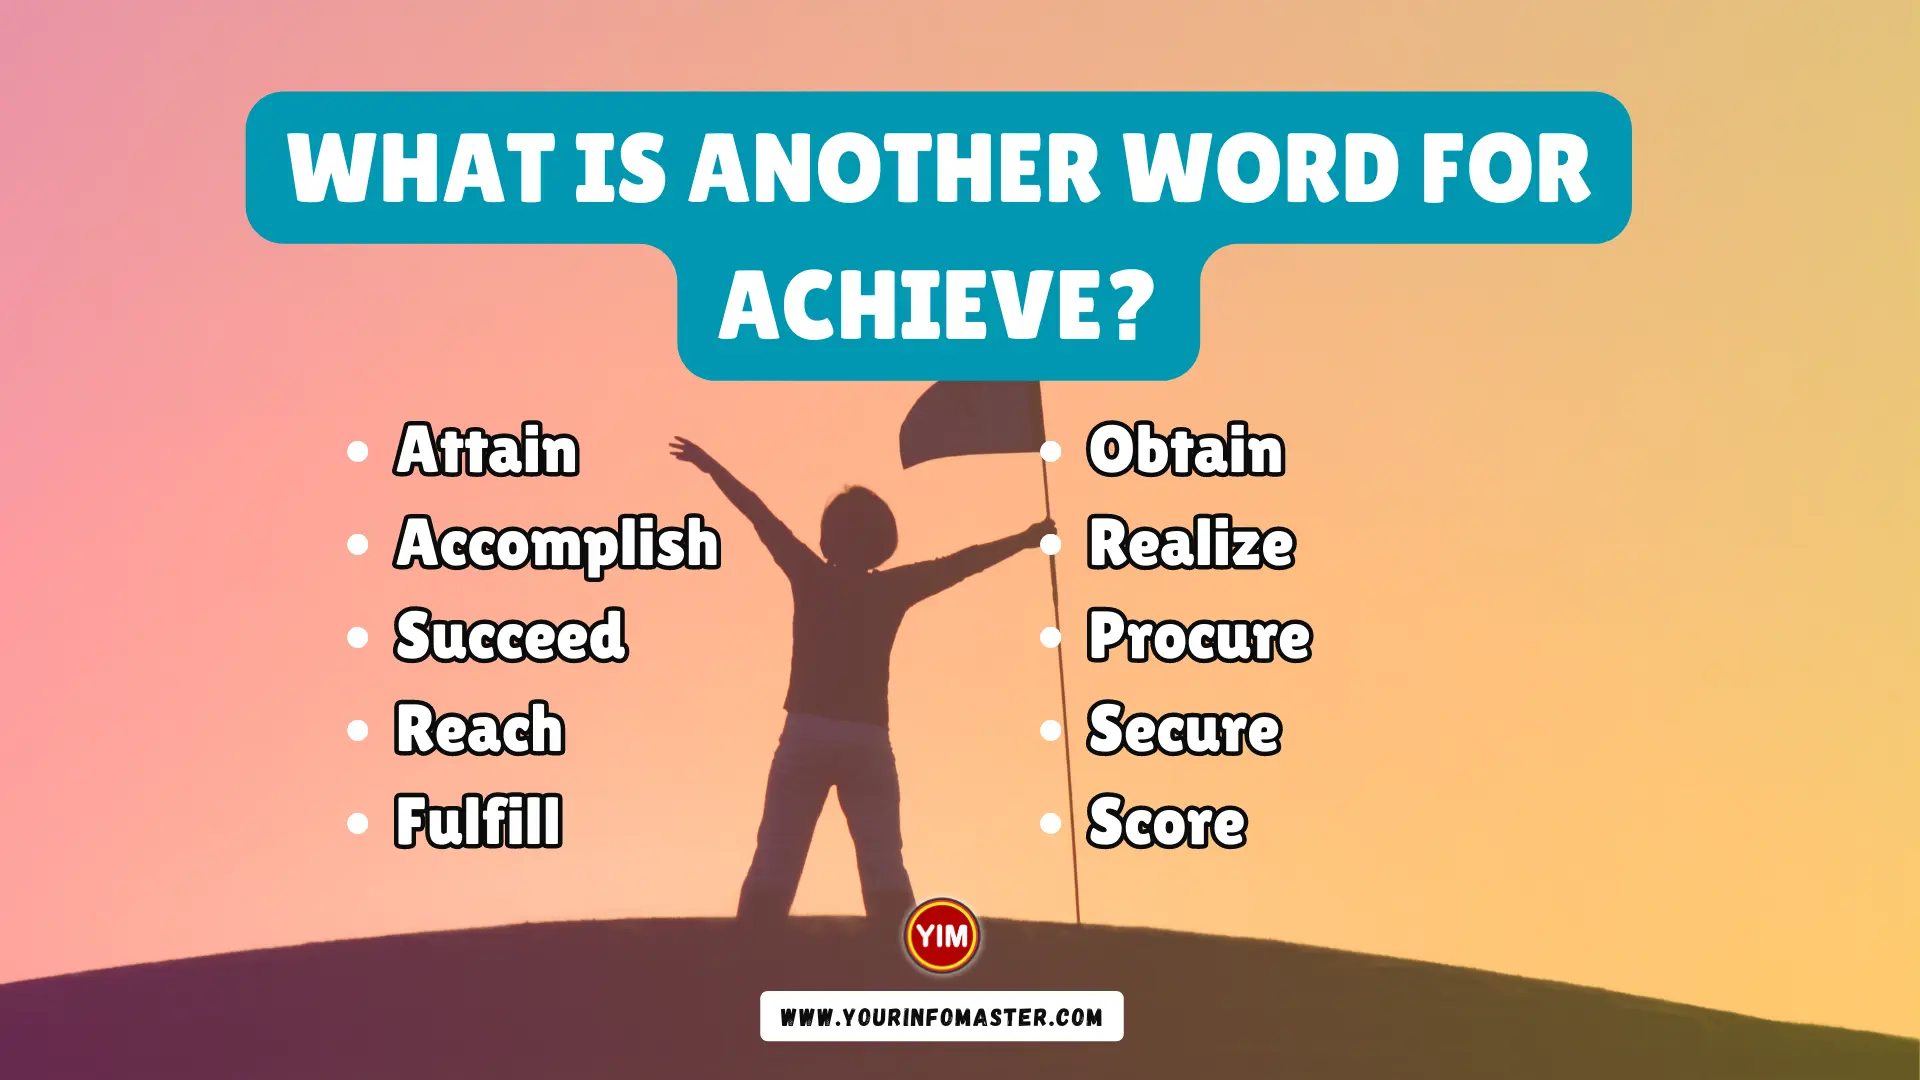 What is another word for Achieve